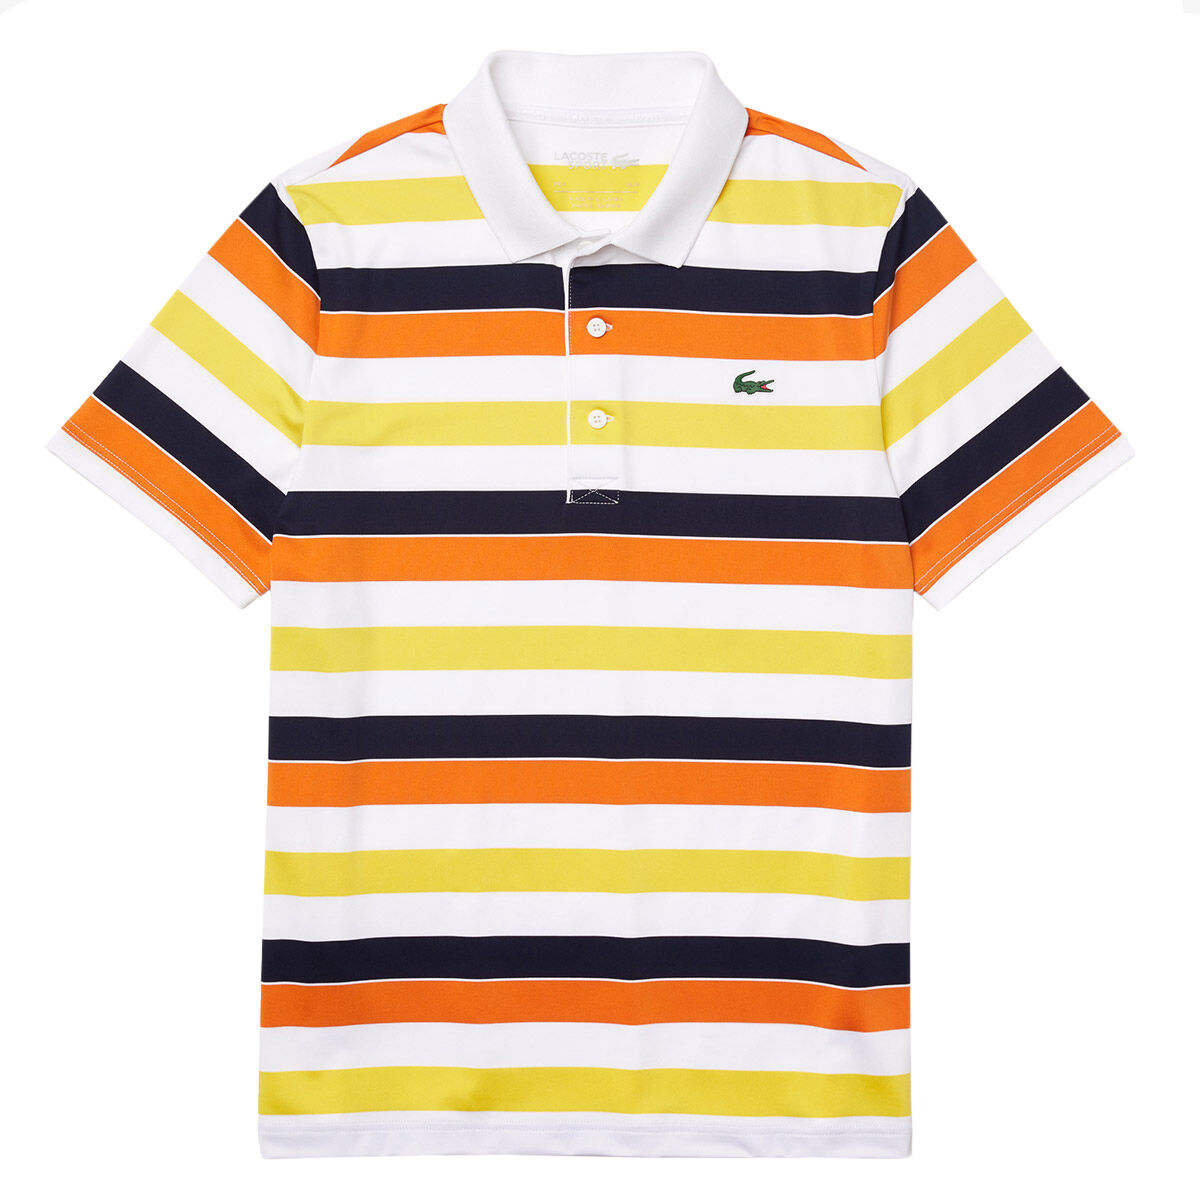 Lacoste Mens White, Navy Blue and Orange Stripe SPORT Breathable Stretch Golf Polo Shirt, Size: Small | American Golf von Lacoste